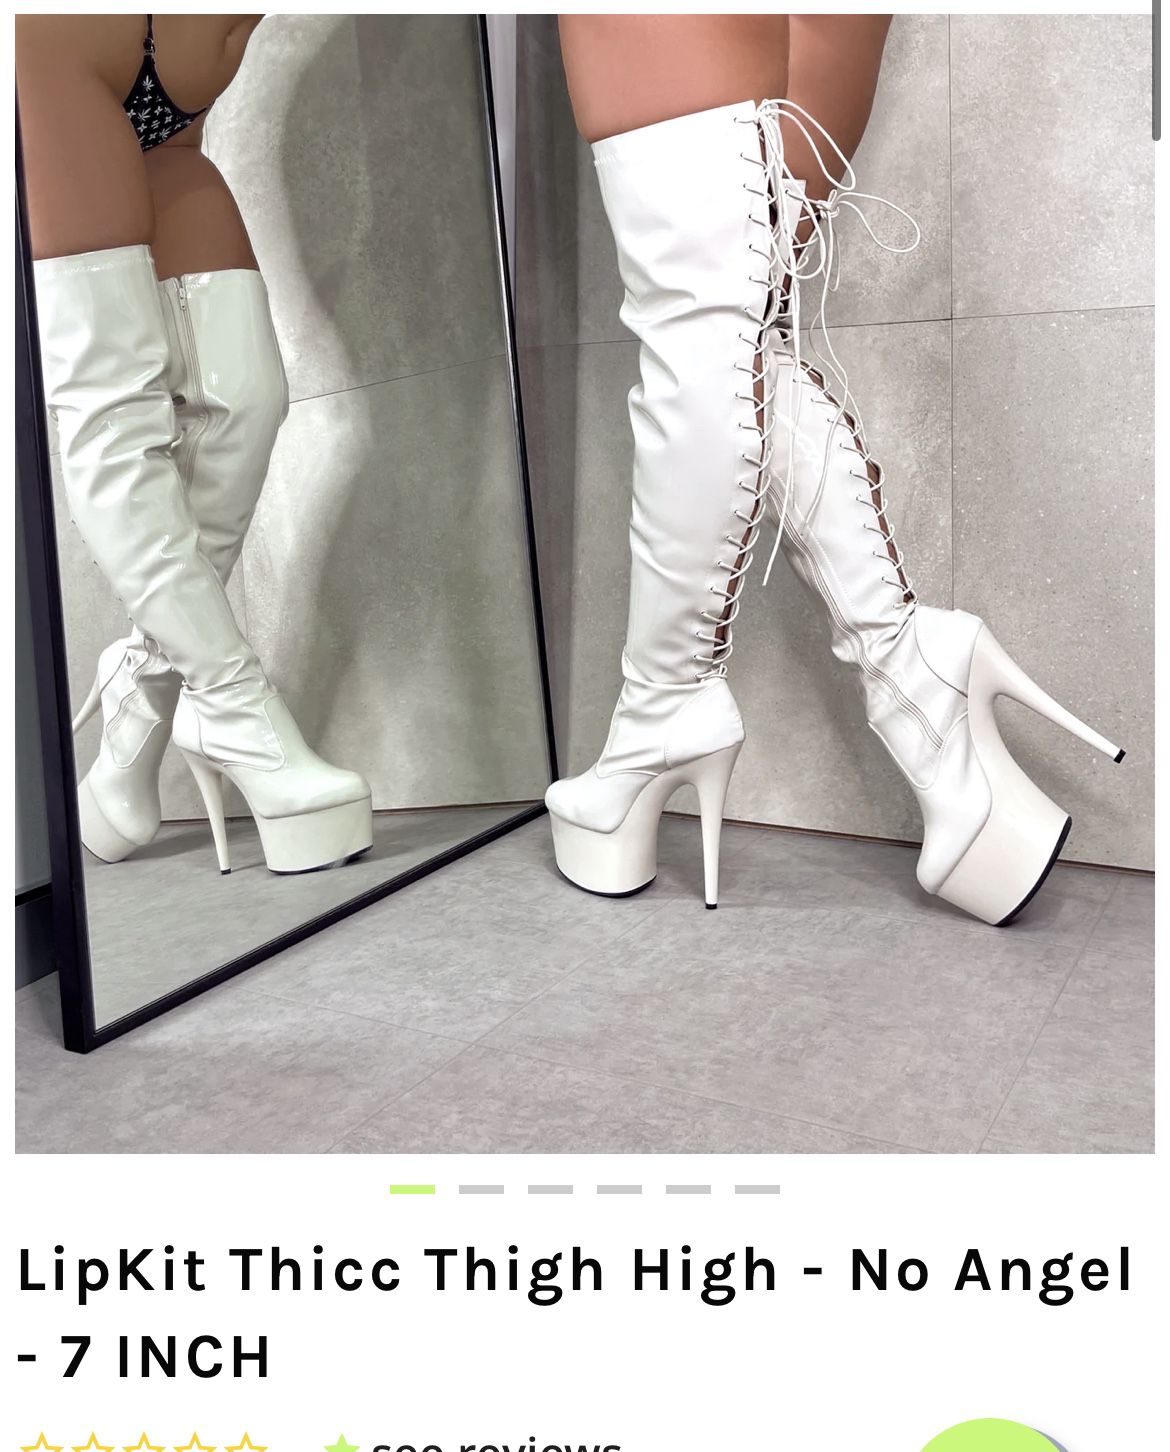 New Thicc thigh High Boots 7” Stilletto Size 8 - lip kit Hella heelz - in box 